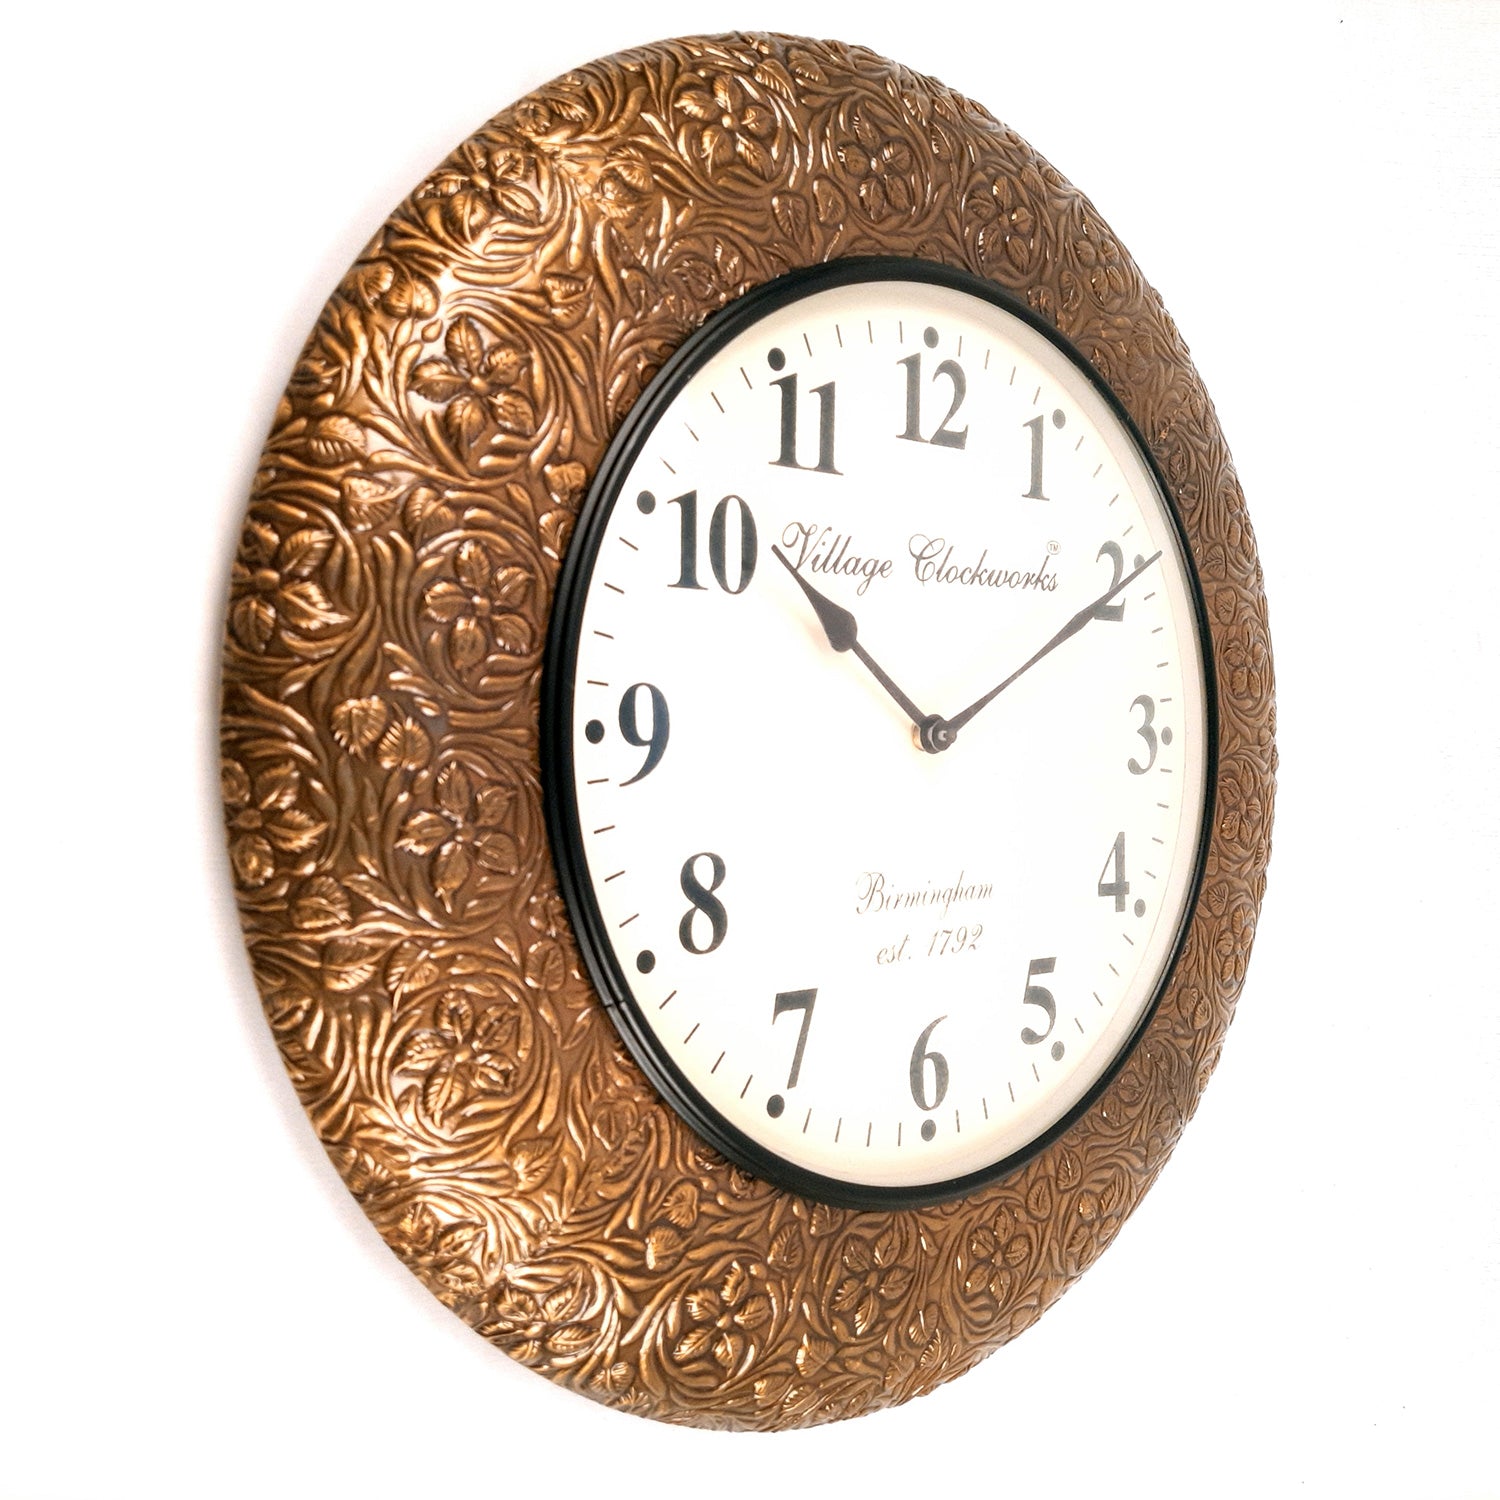 Wall Clock Wooden | Hanging Analog Clock With Antique Brass Work - For Home, Living Room, Bedroom, Office & Hall Decoration | Wedding & Housewarming Gift -18 Inches - Apkamart